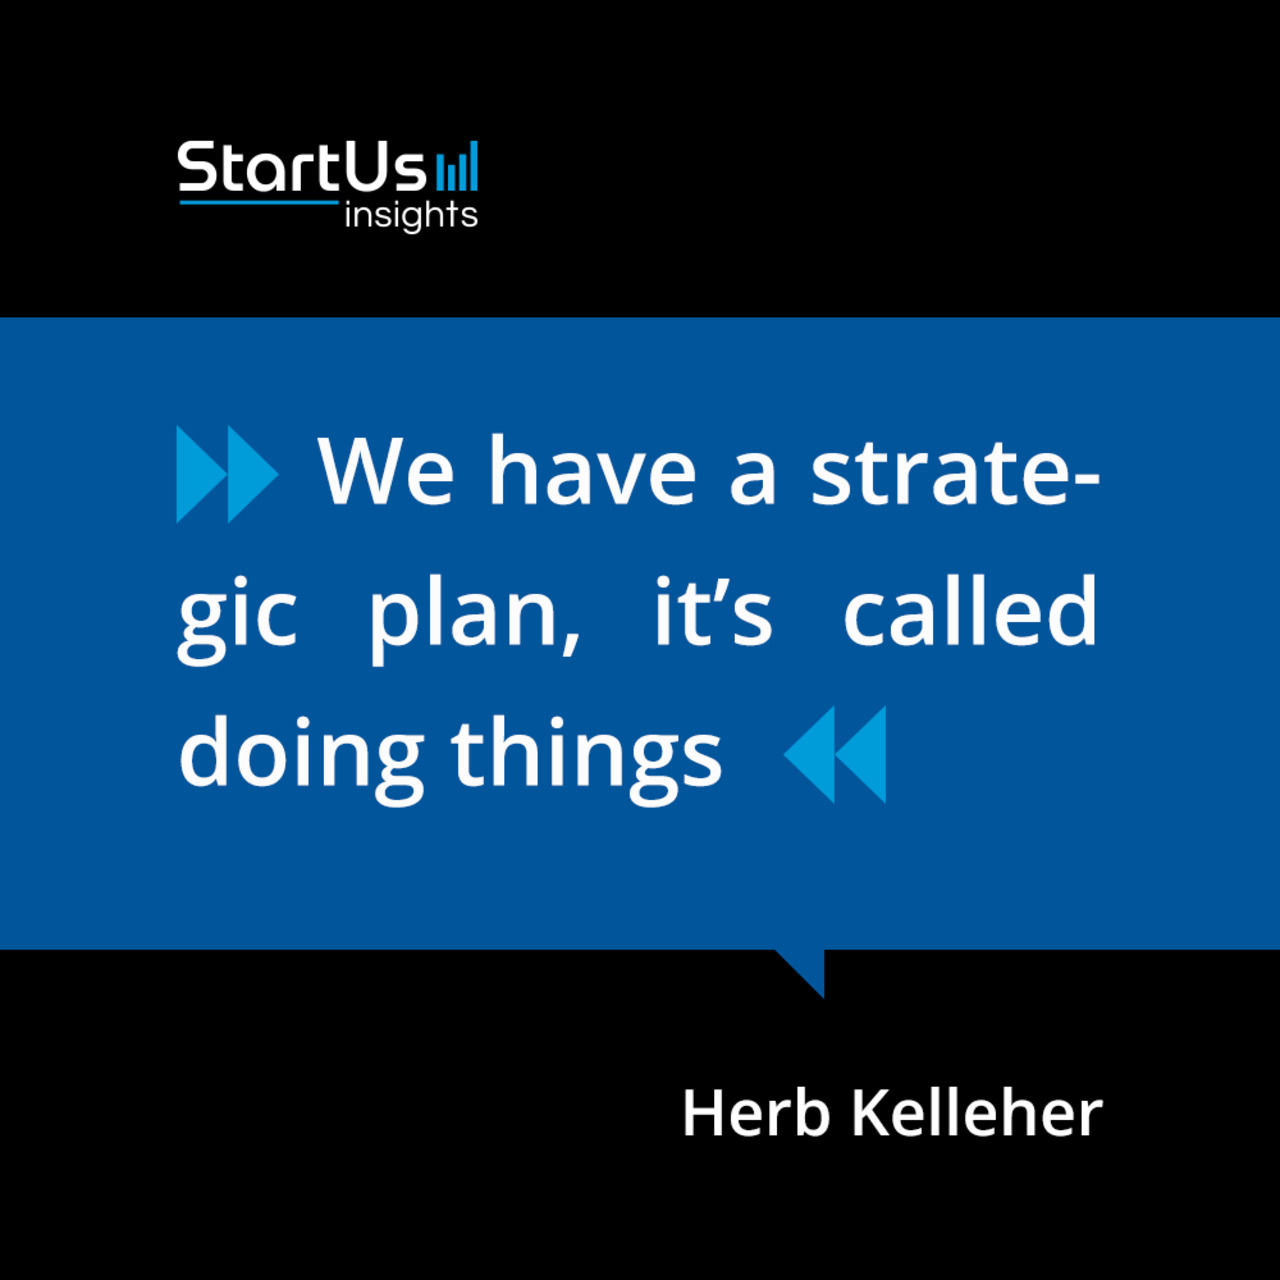 "We have a strategic plan, it's called doing things." #Innovation #Strategy #CorporateInnovation #NewBusiness https://t.co/5onxI3odPm